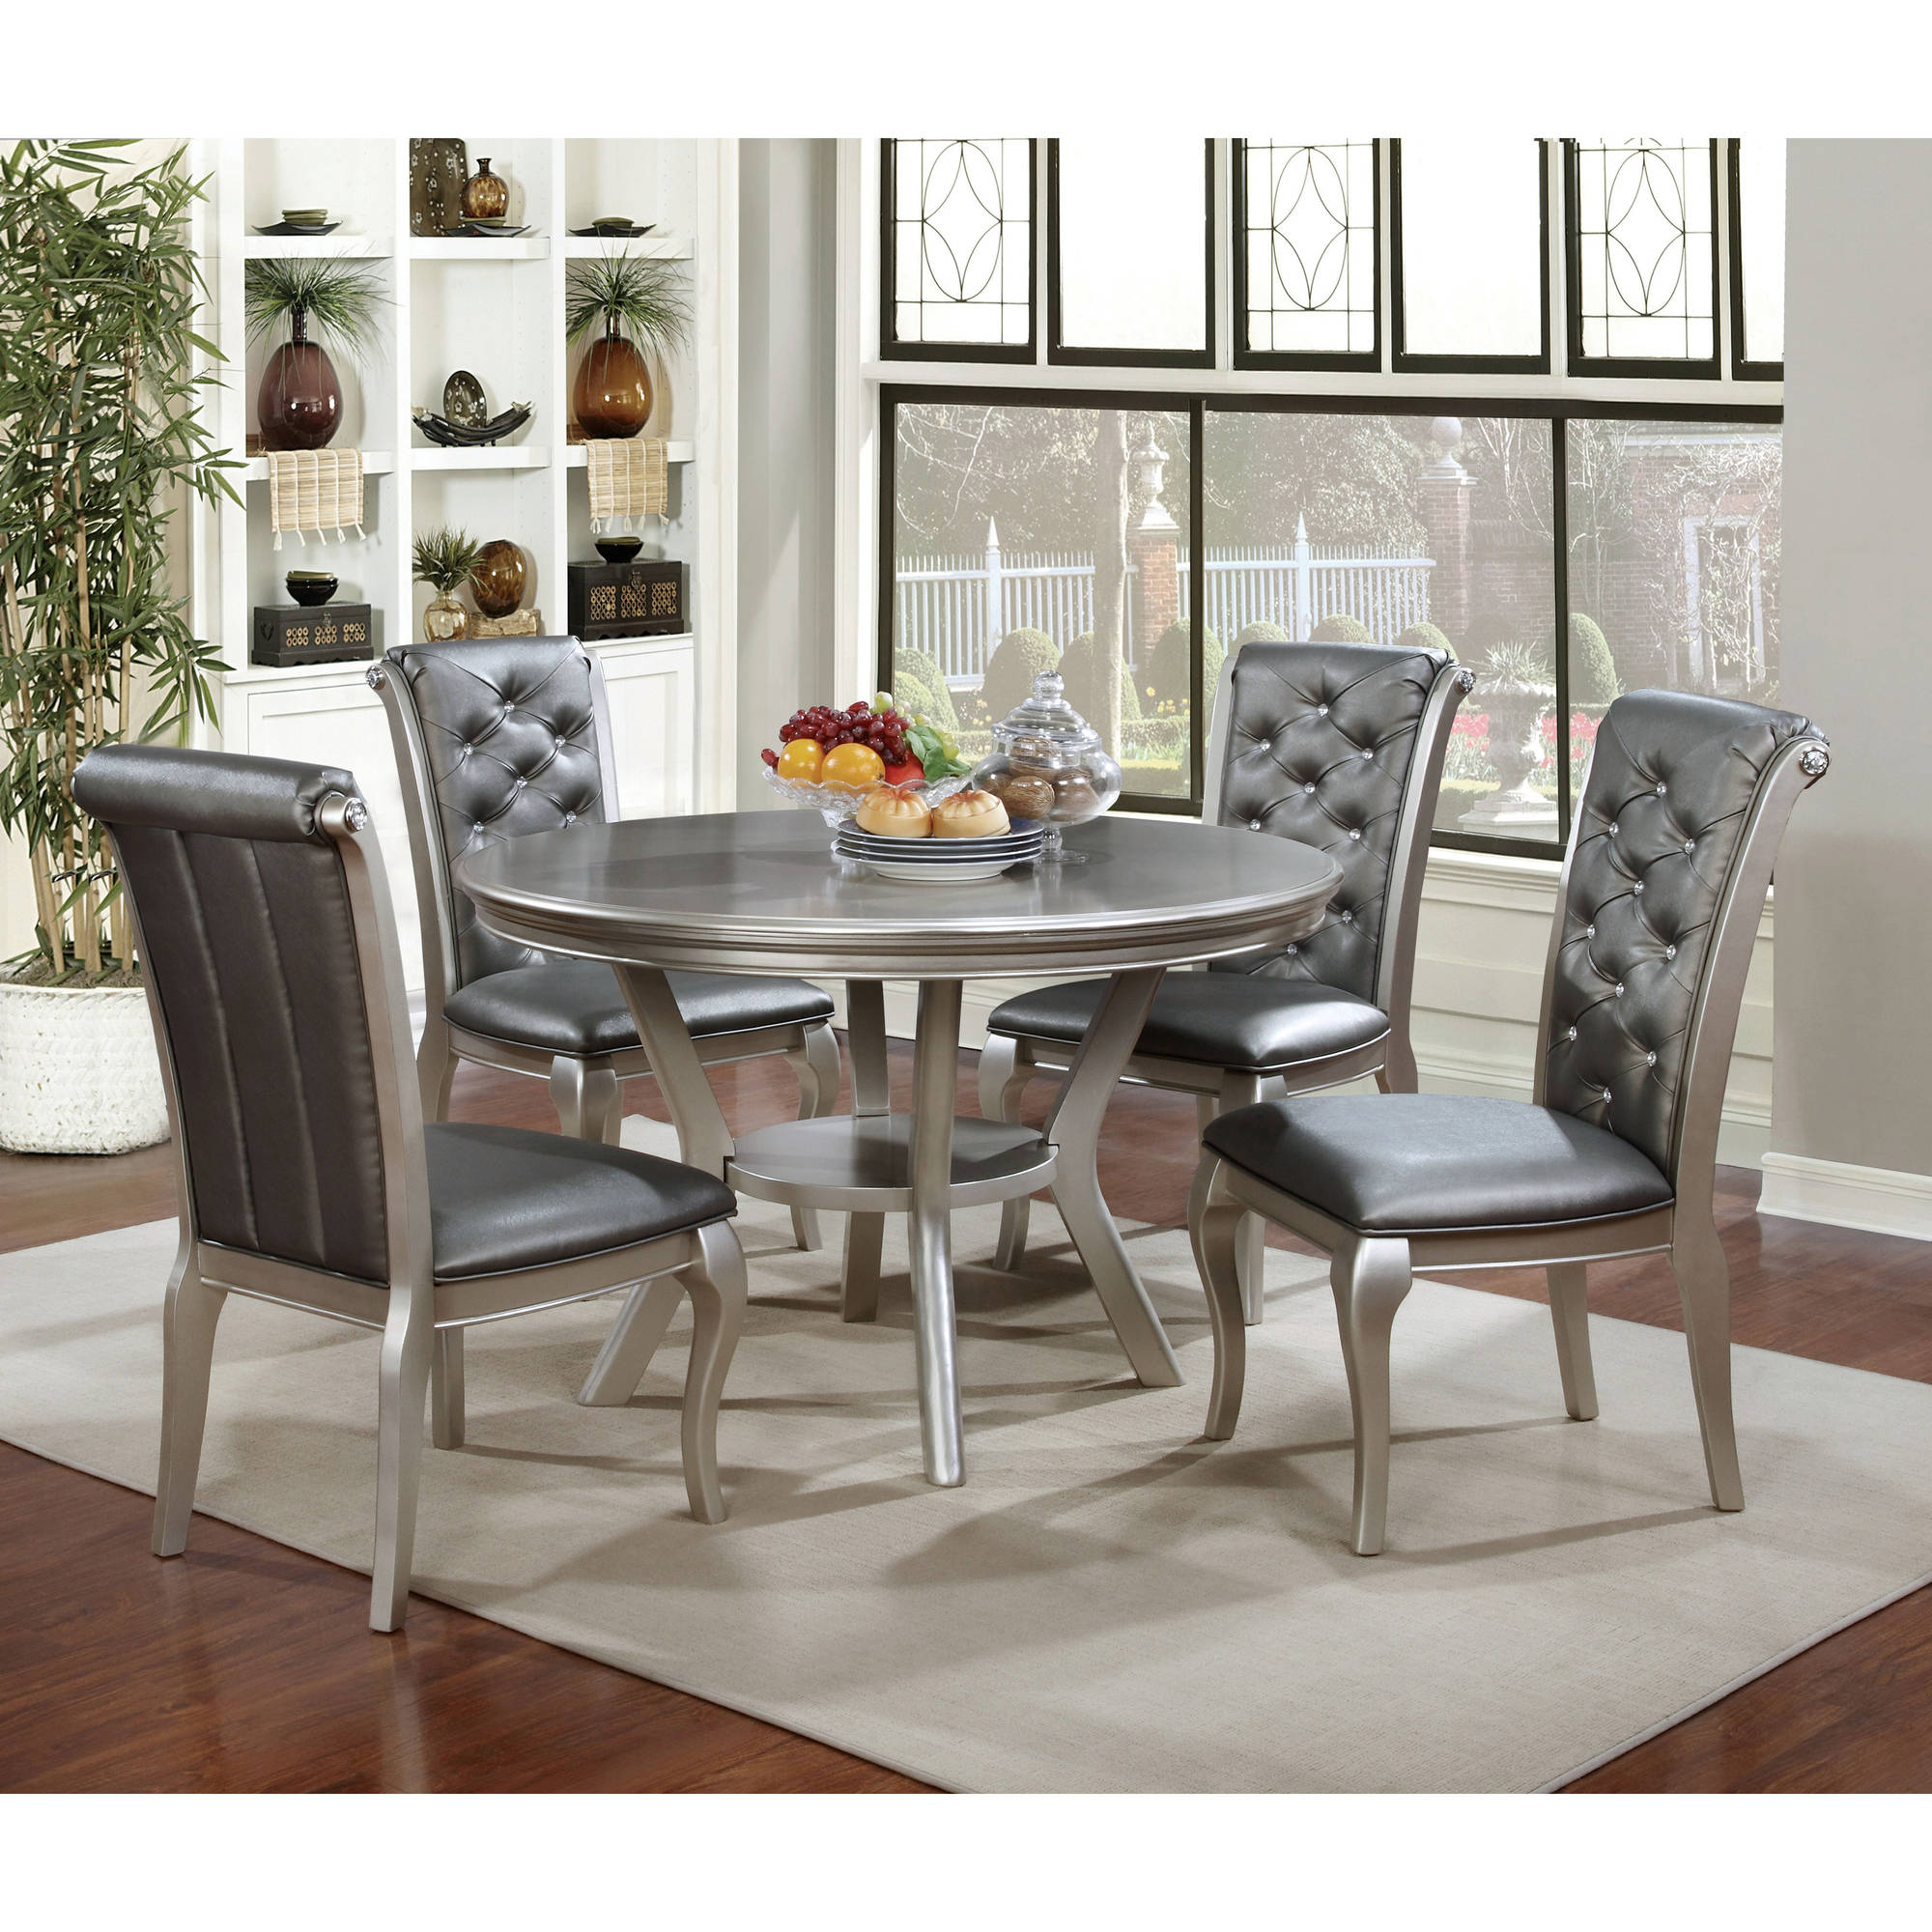 Furniture of America Minham Contemporary Round Dining Table, Silver